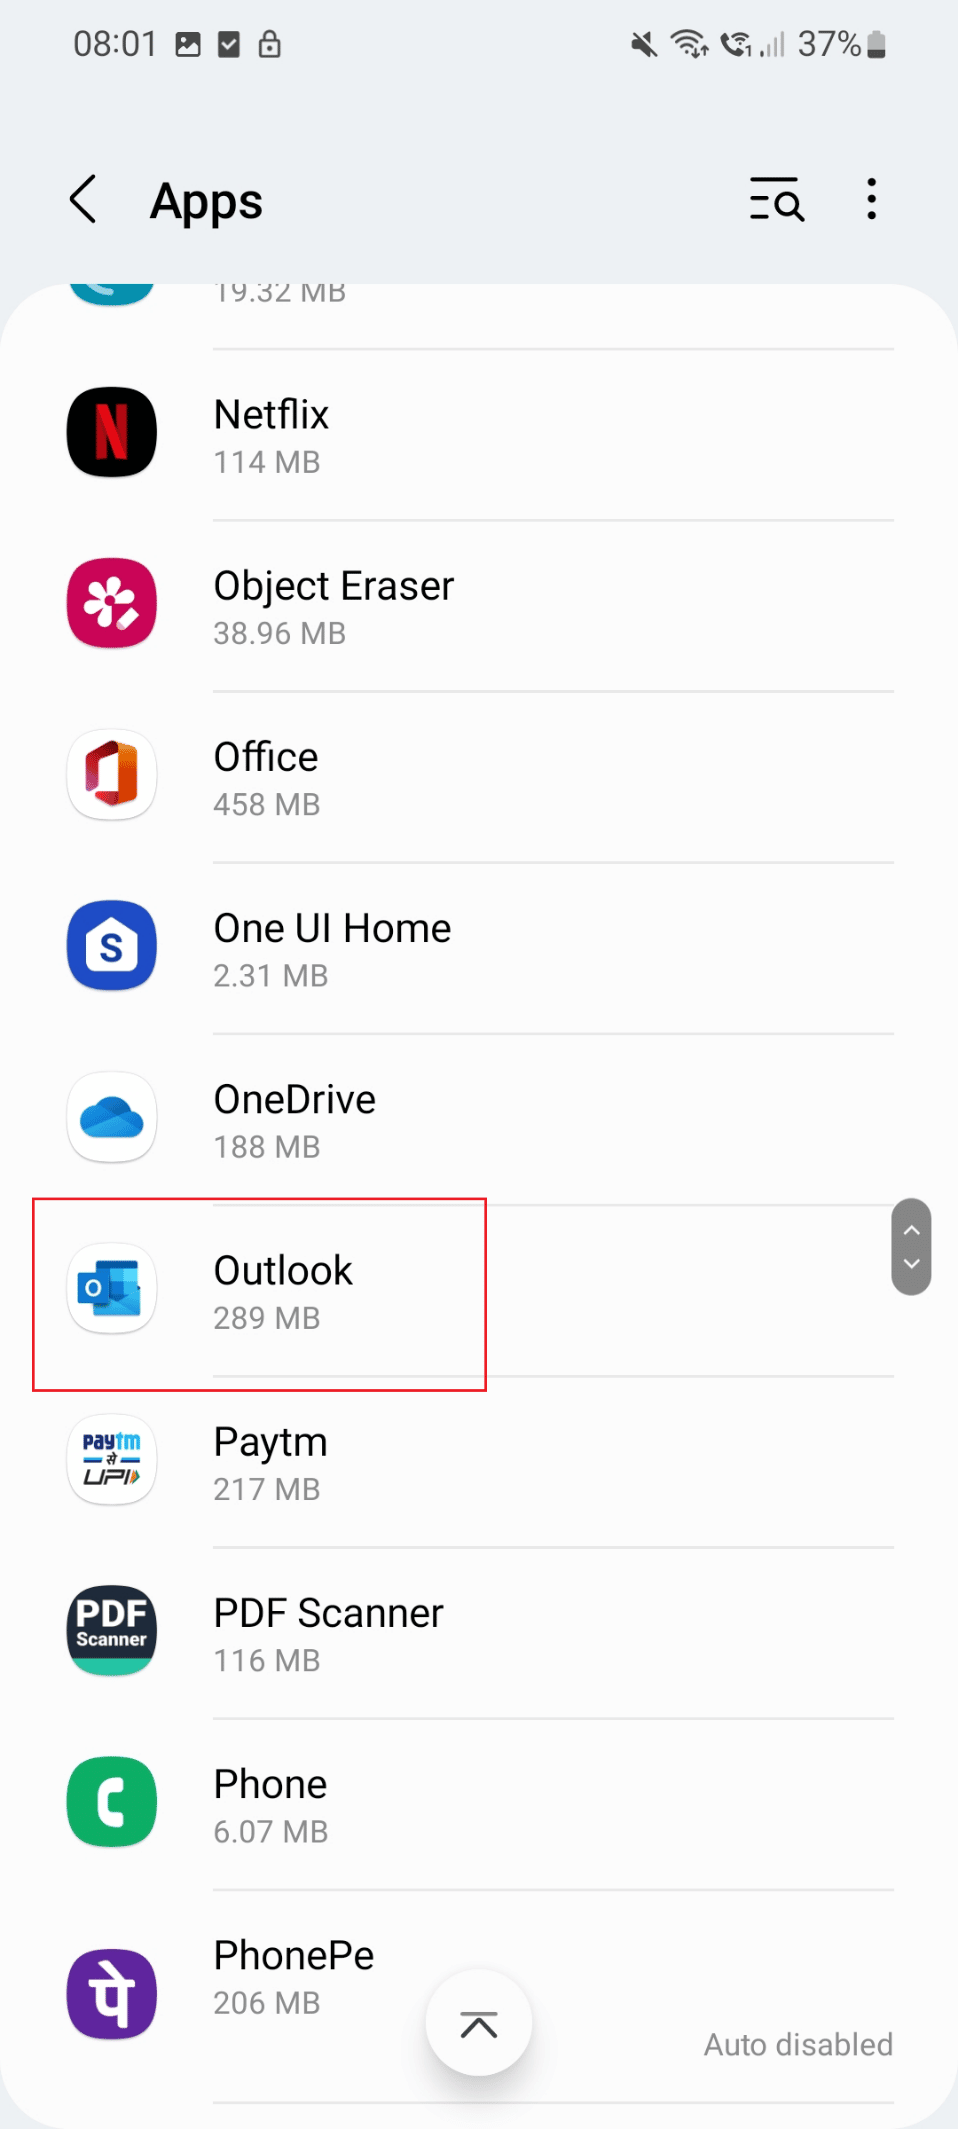 Scroll down and tap on the Outlook app